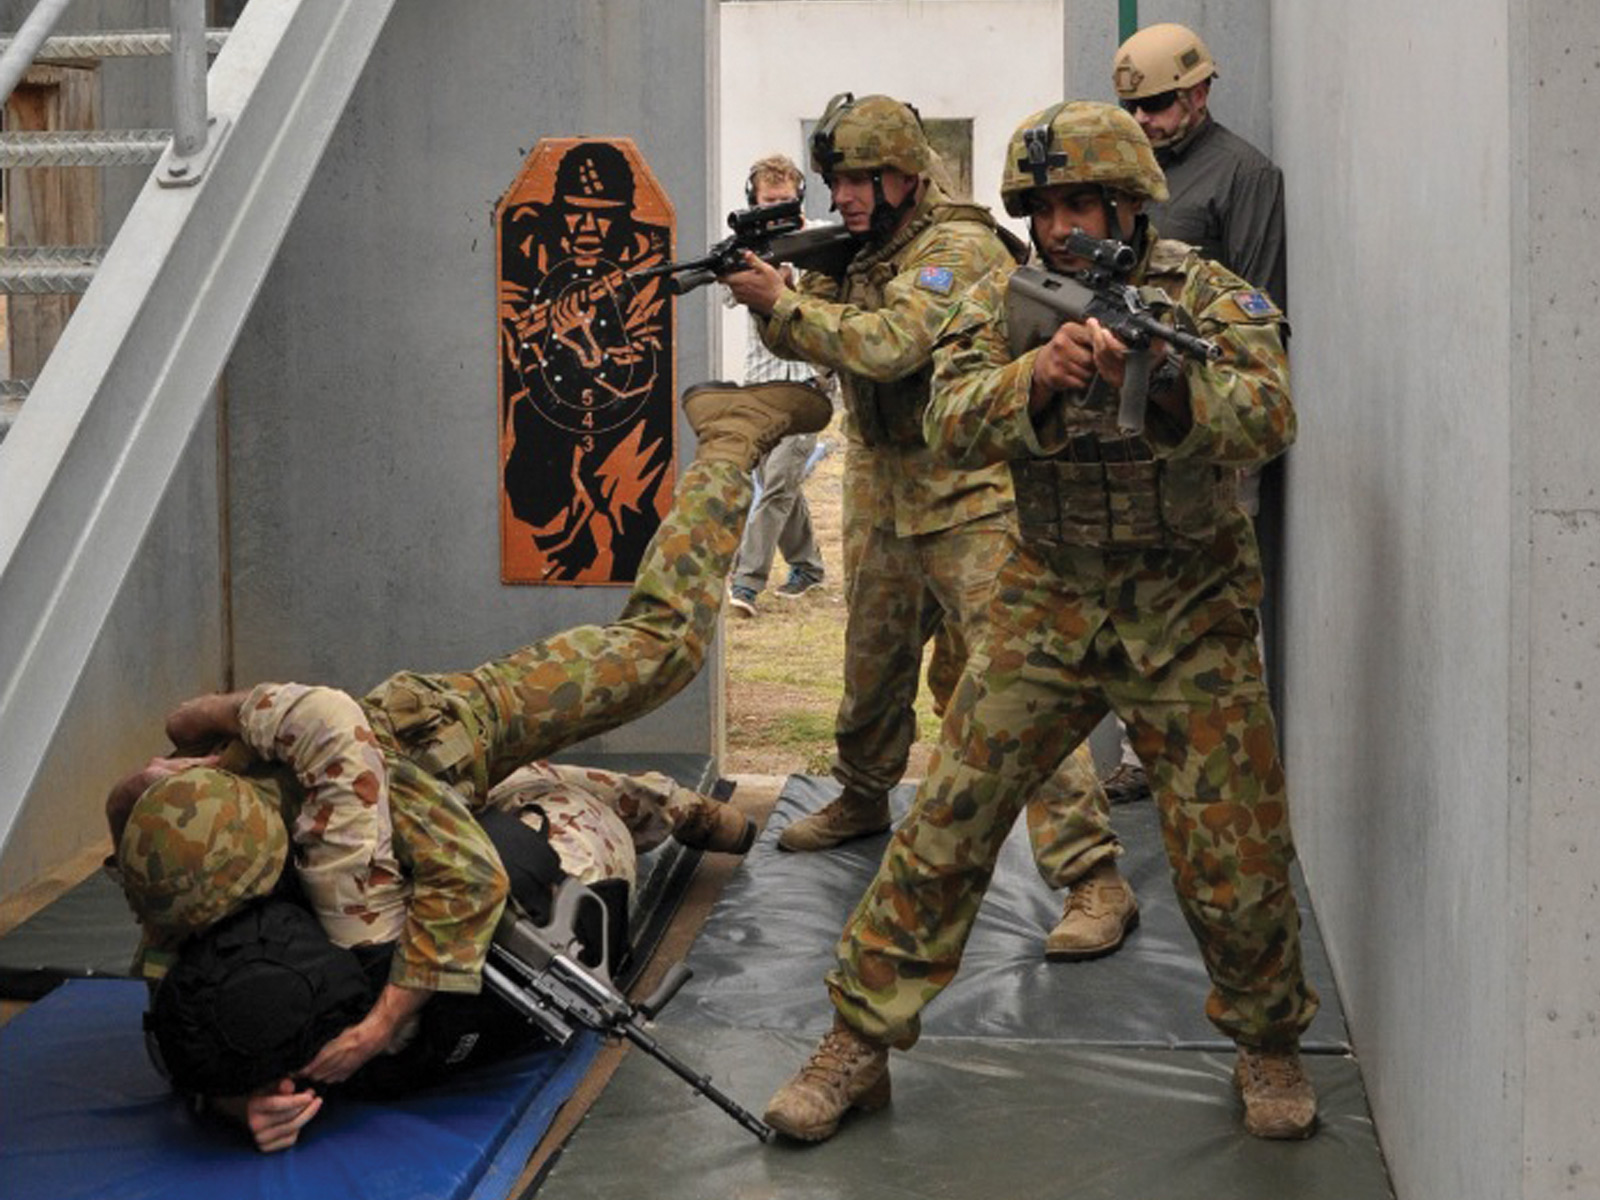 Paul Cale teaching 'ground domination' tactics to Australian Infantry soldiers